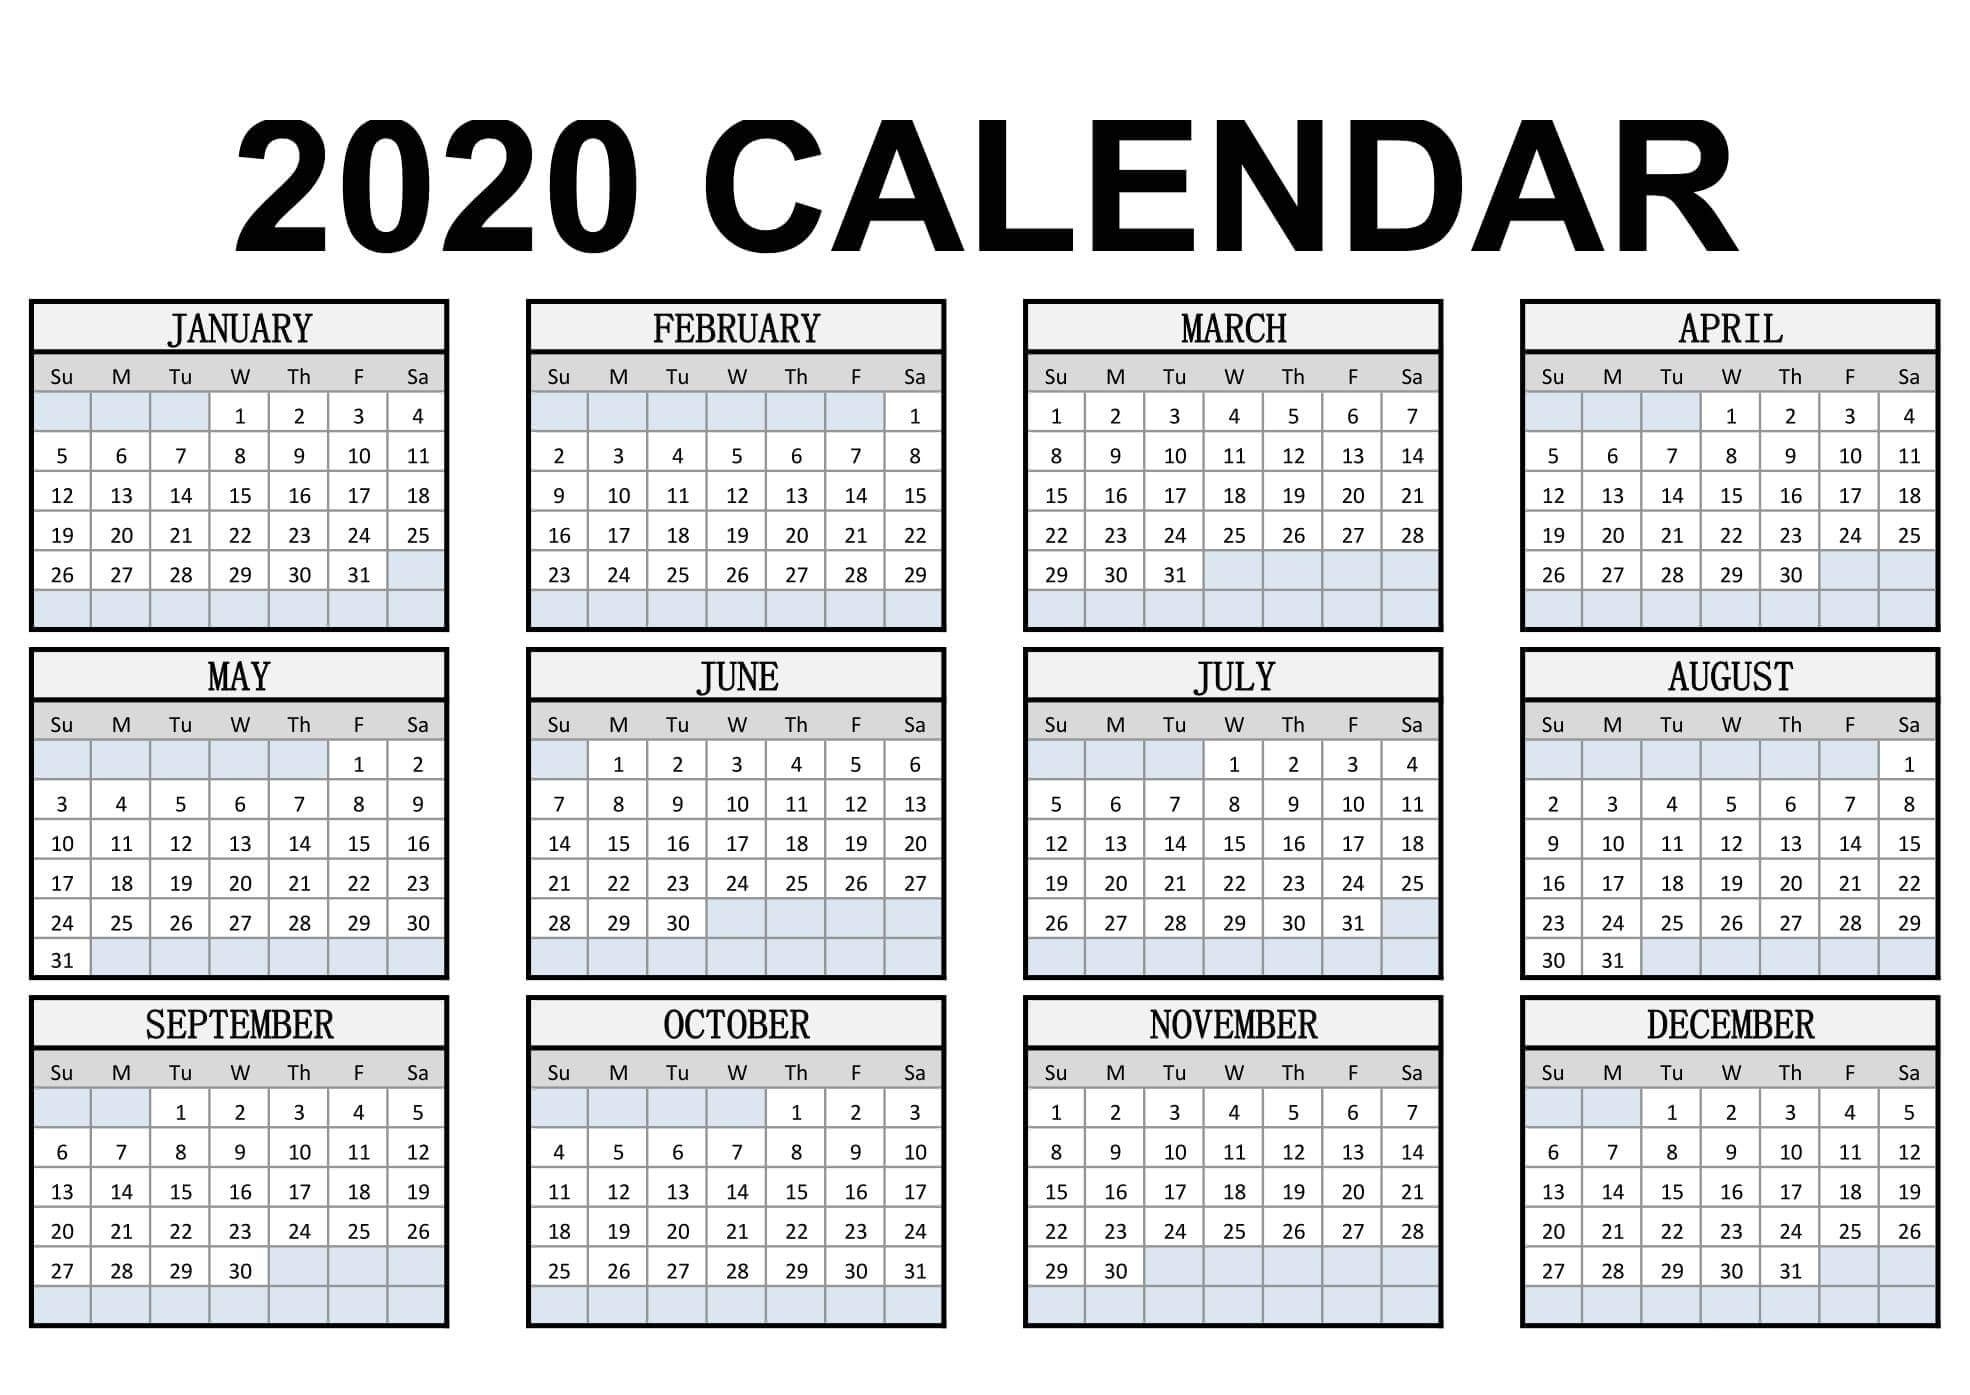 Calendar Year 2020 Holidays Template - 2019 Calendars For Exceptional Printable Calenders For The Whole Year 2020